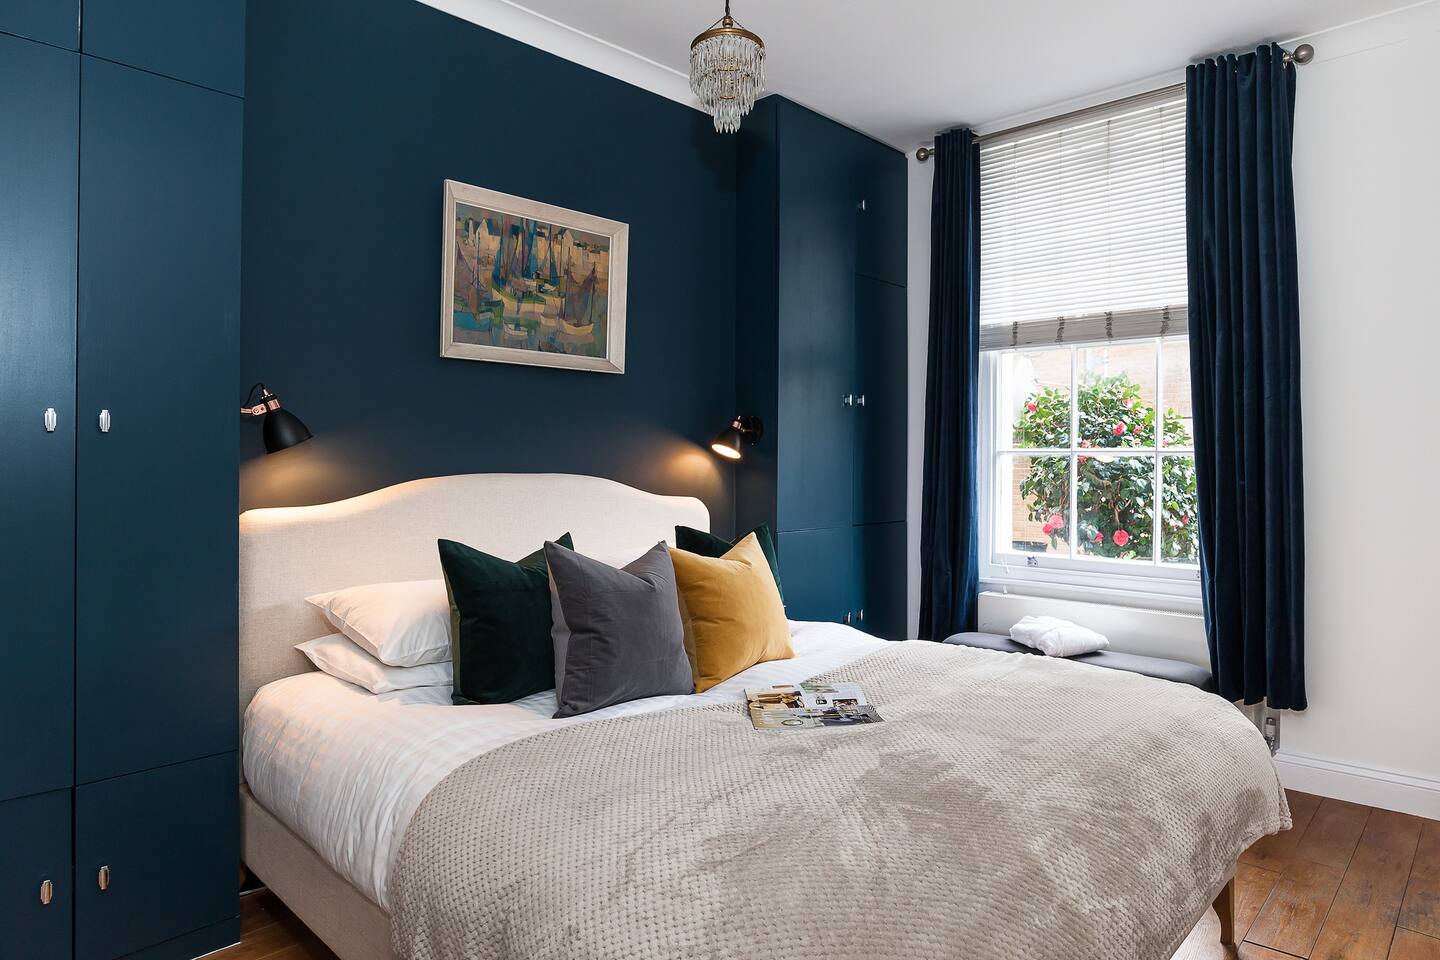 The Best Airbnbs In Notting Hill - London Kensington Guide